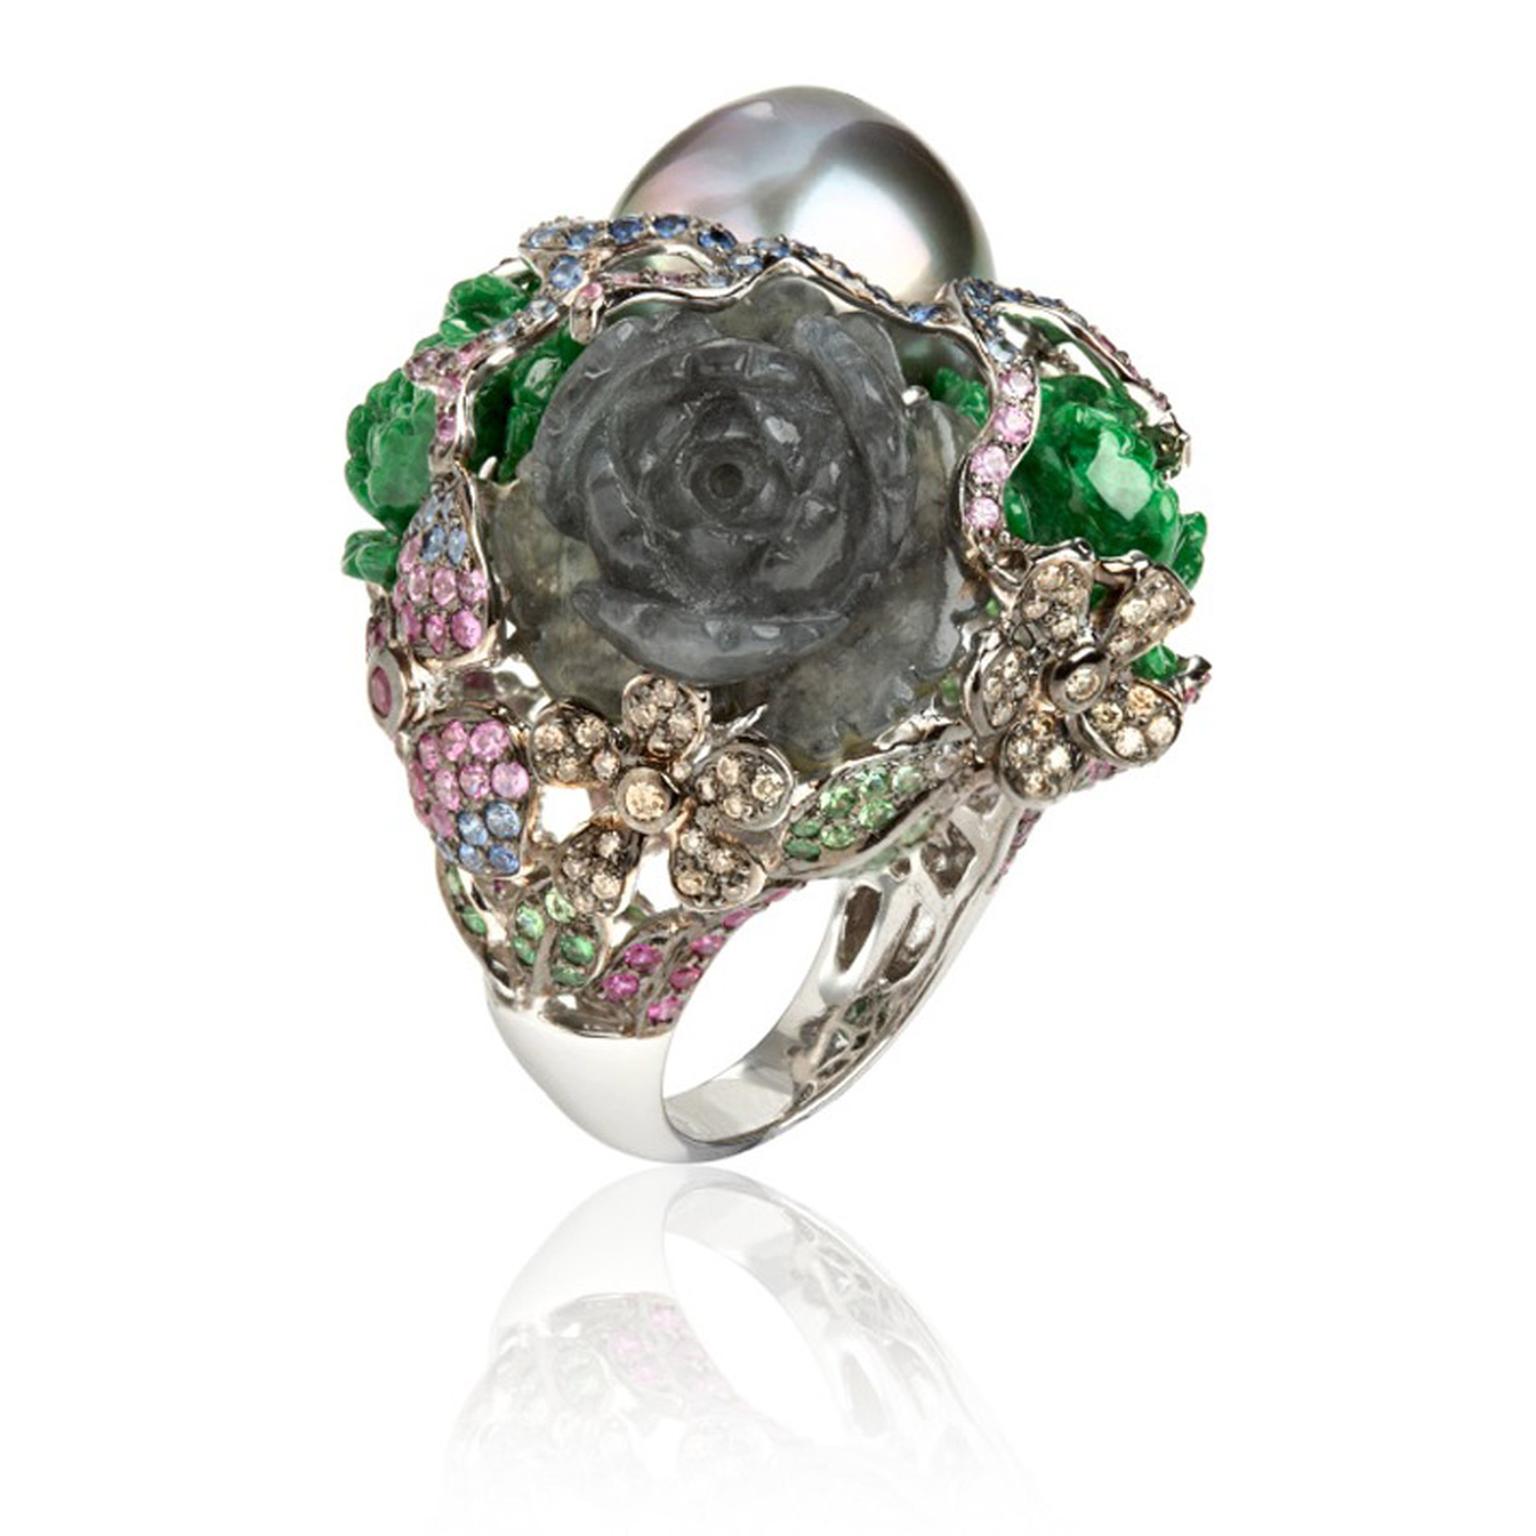 Wendy-Yue-Fantasie-18ct-white-gold,-pearl,--diamond,-sapphires,-garnet,jade-and-tourmaline-Perilous-Pearl-ring-By-Wendy--Yue-for-Annoushka.jpg